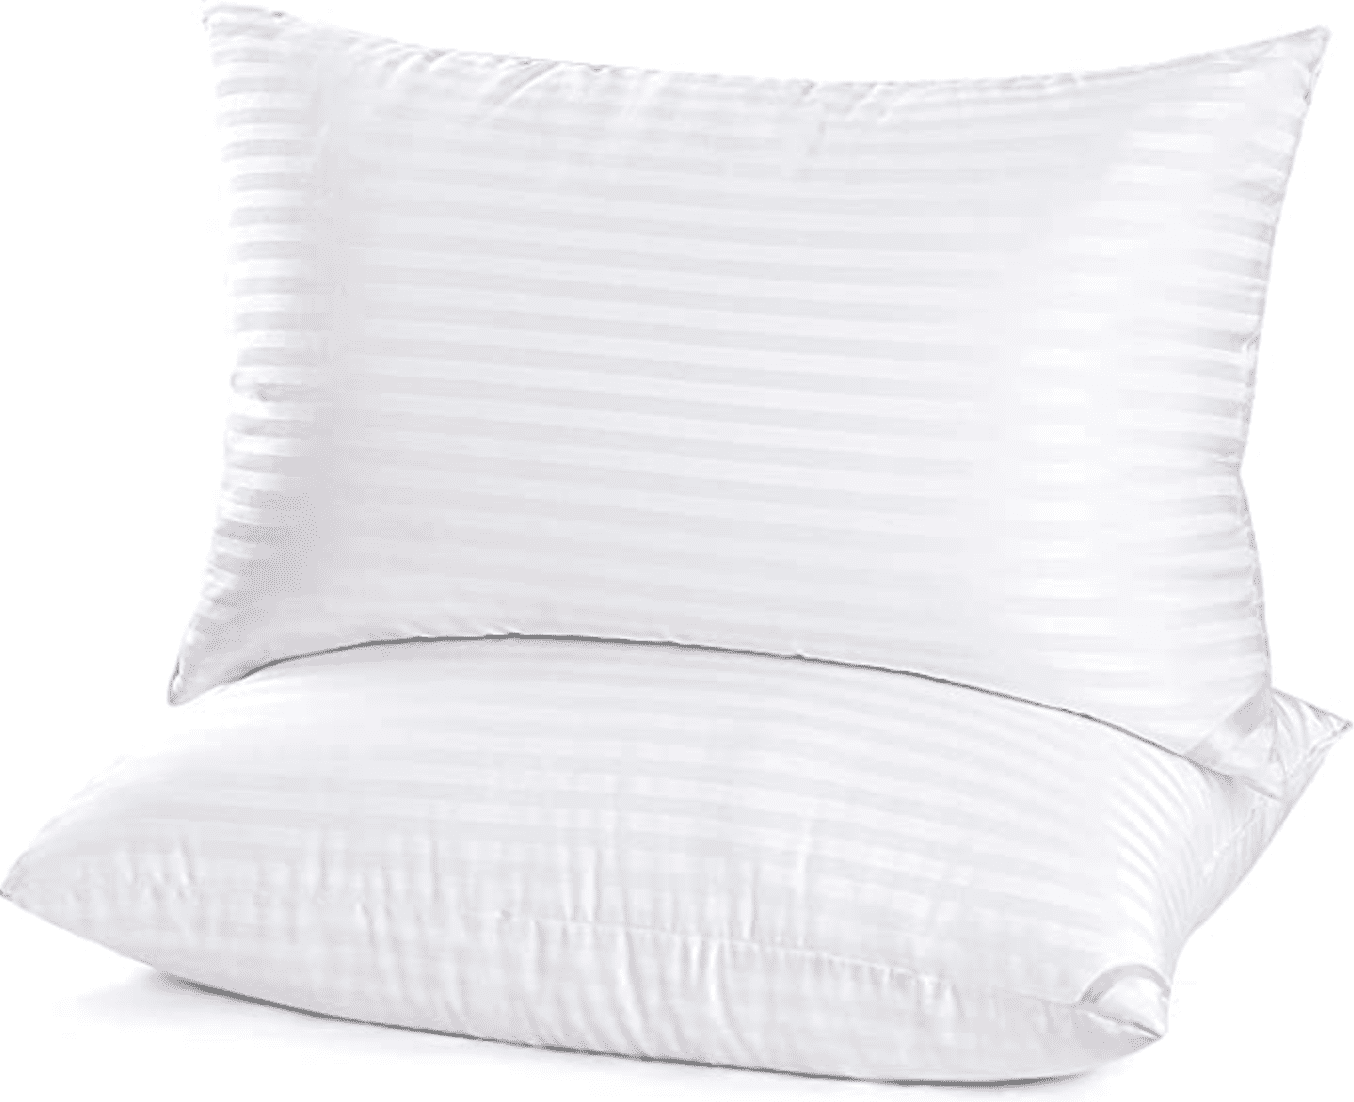 https://cdn.apartmenttherapy.info/image/upload/v1683739296/commerce/Amazon-EIUE-Hotel-Collection-Bed-Pillows.png